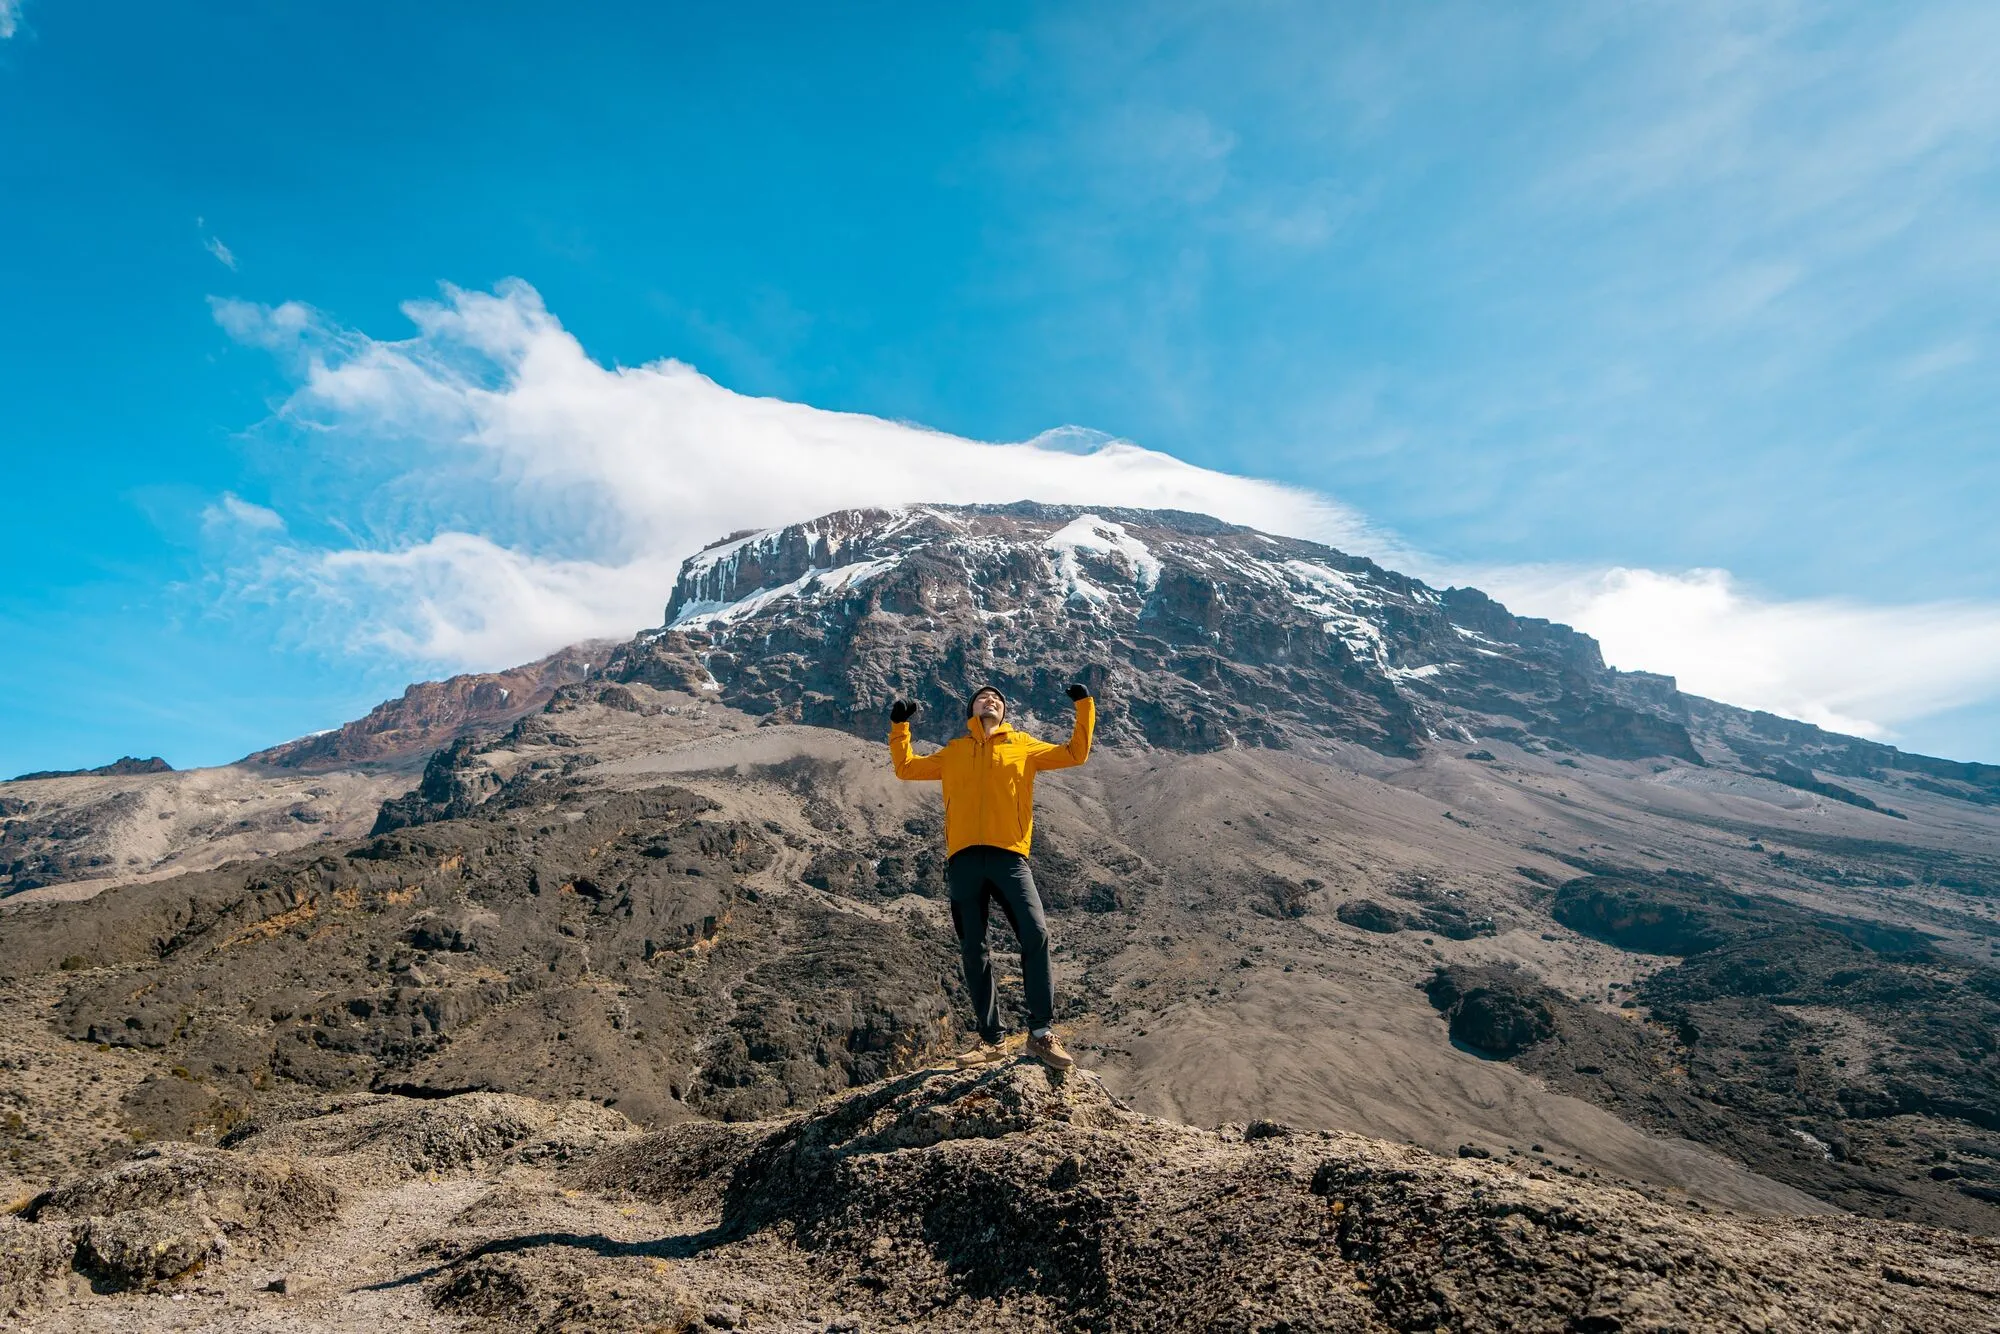 A Complete Hiking Guide to Kilimanjaro - A 6-Day Trekking Itinerary for Machame Route